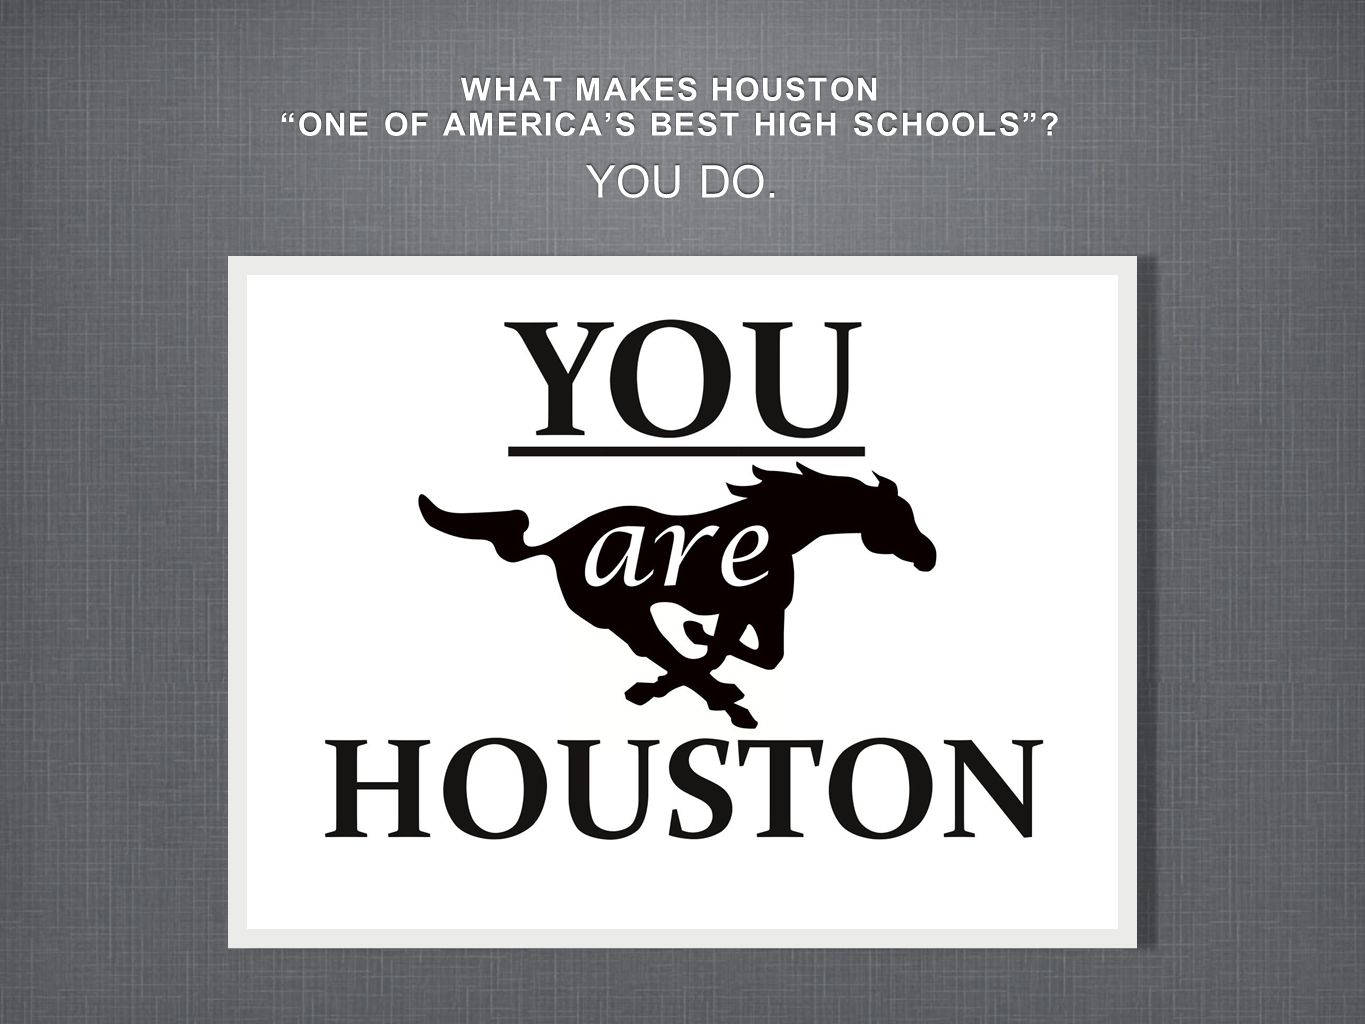 WHAT MAKES HOUSTON ONE OF AMERICA’S BEST HIGH SCHOOLS .